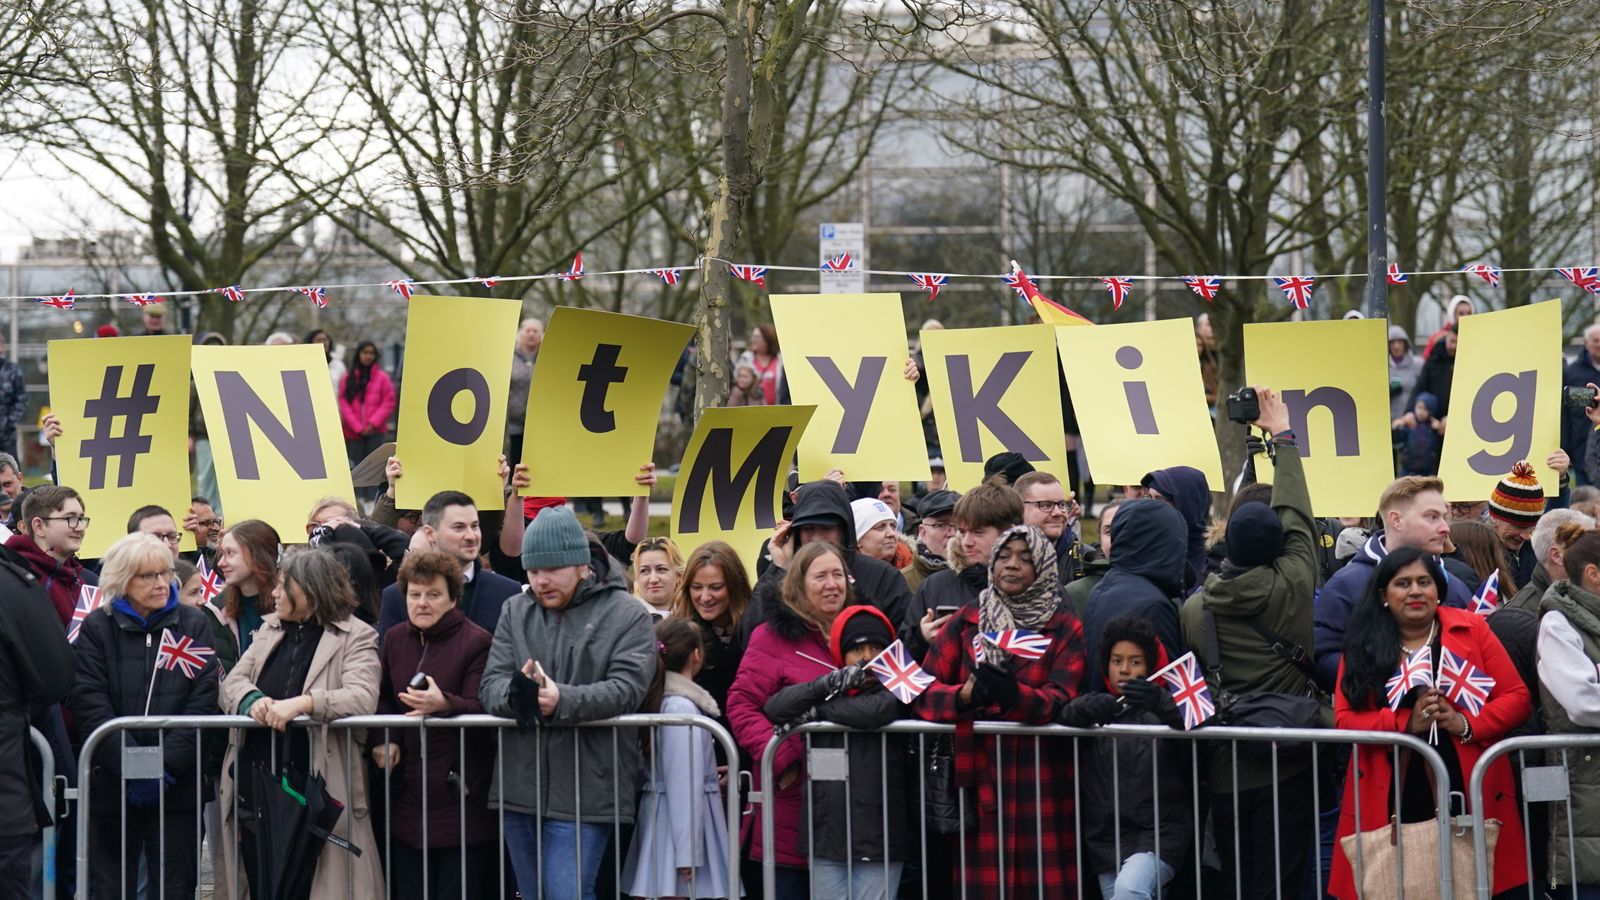 Anti-monarchy protesters question cost of coronation during King's visit to Milton Keynes